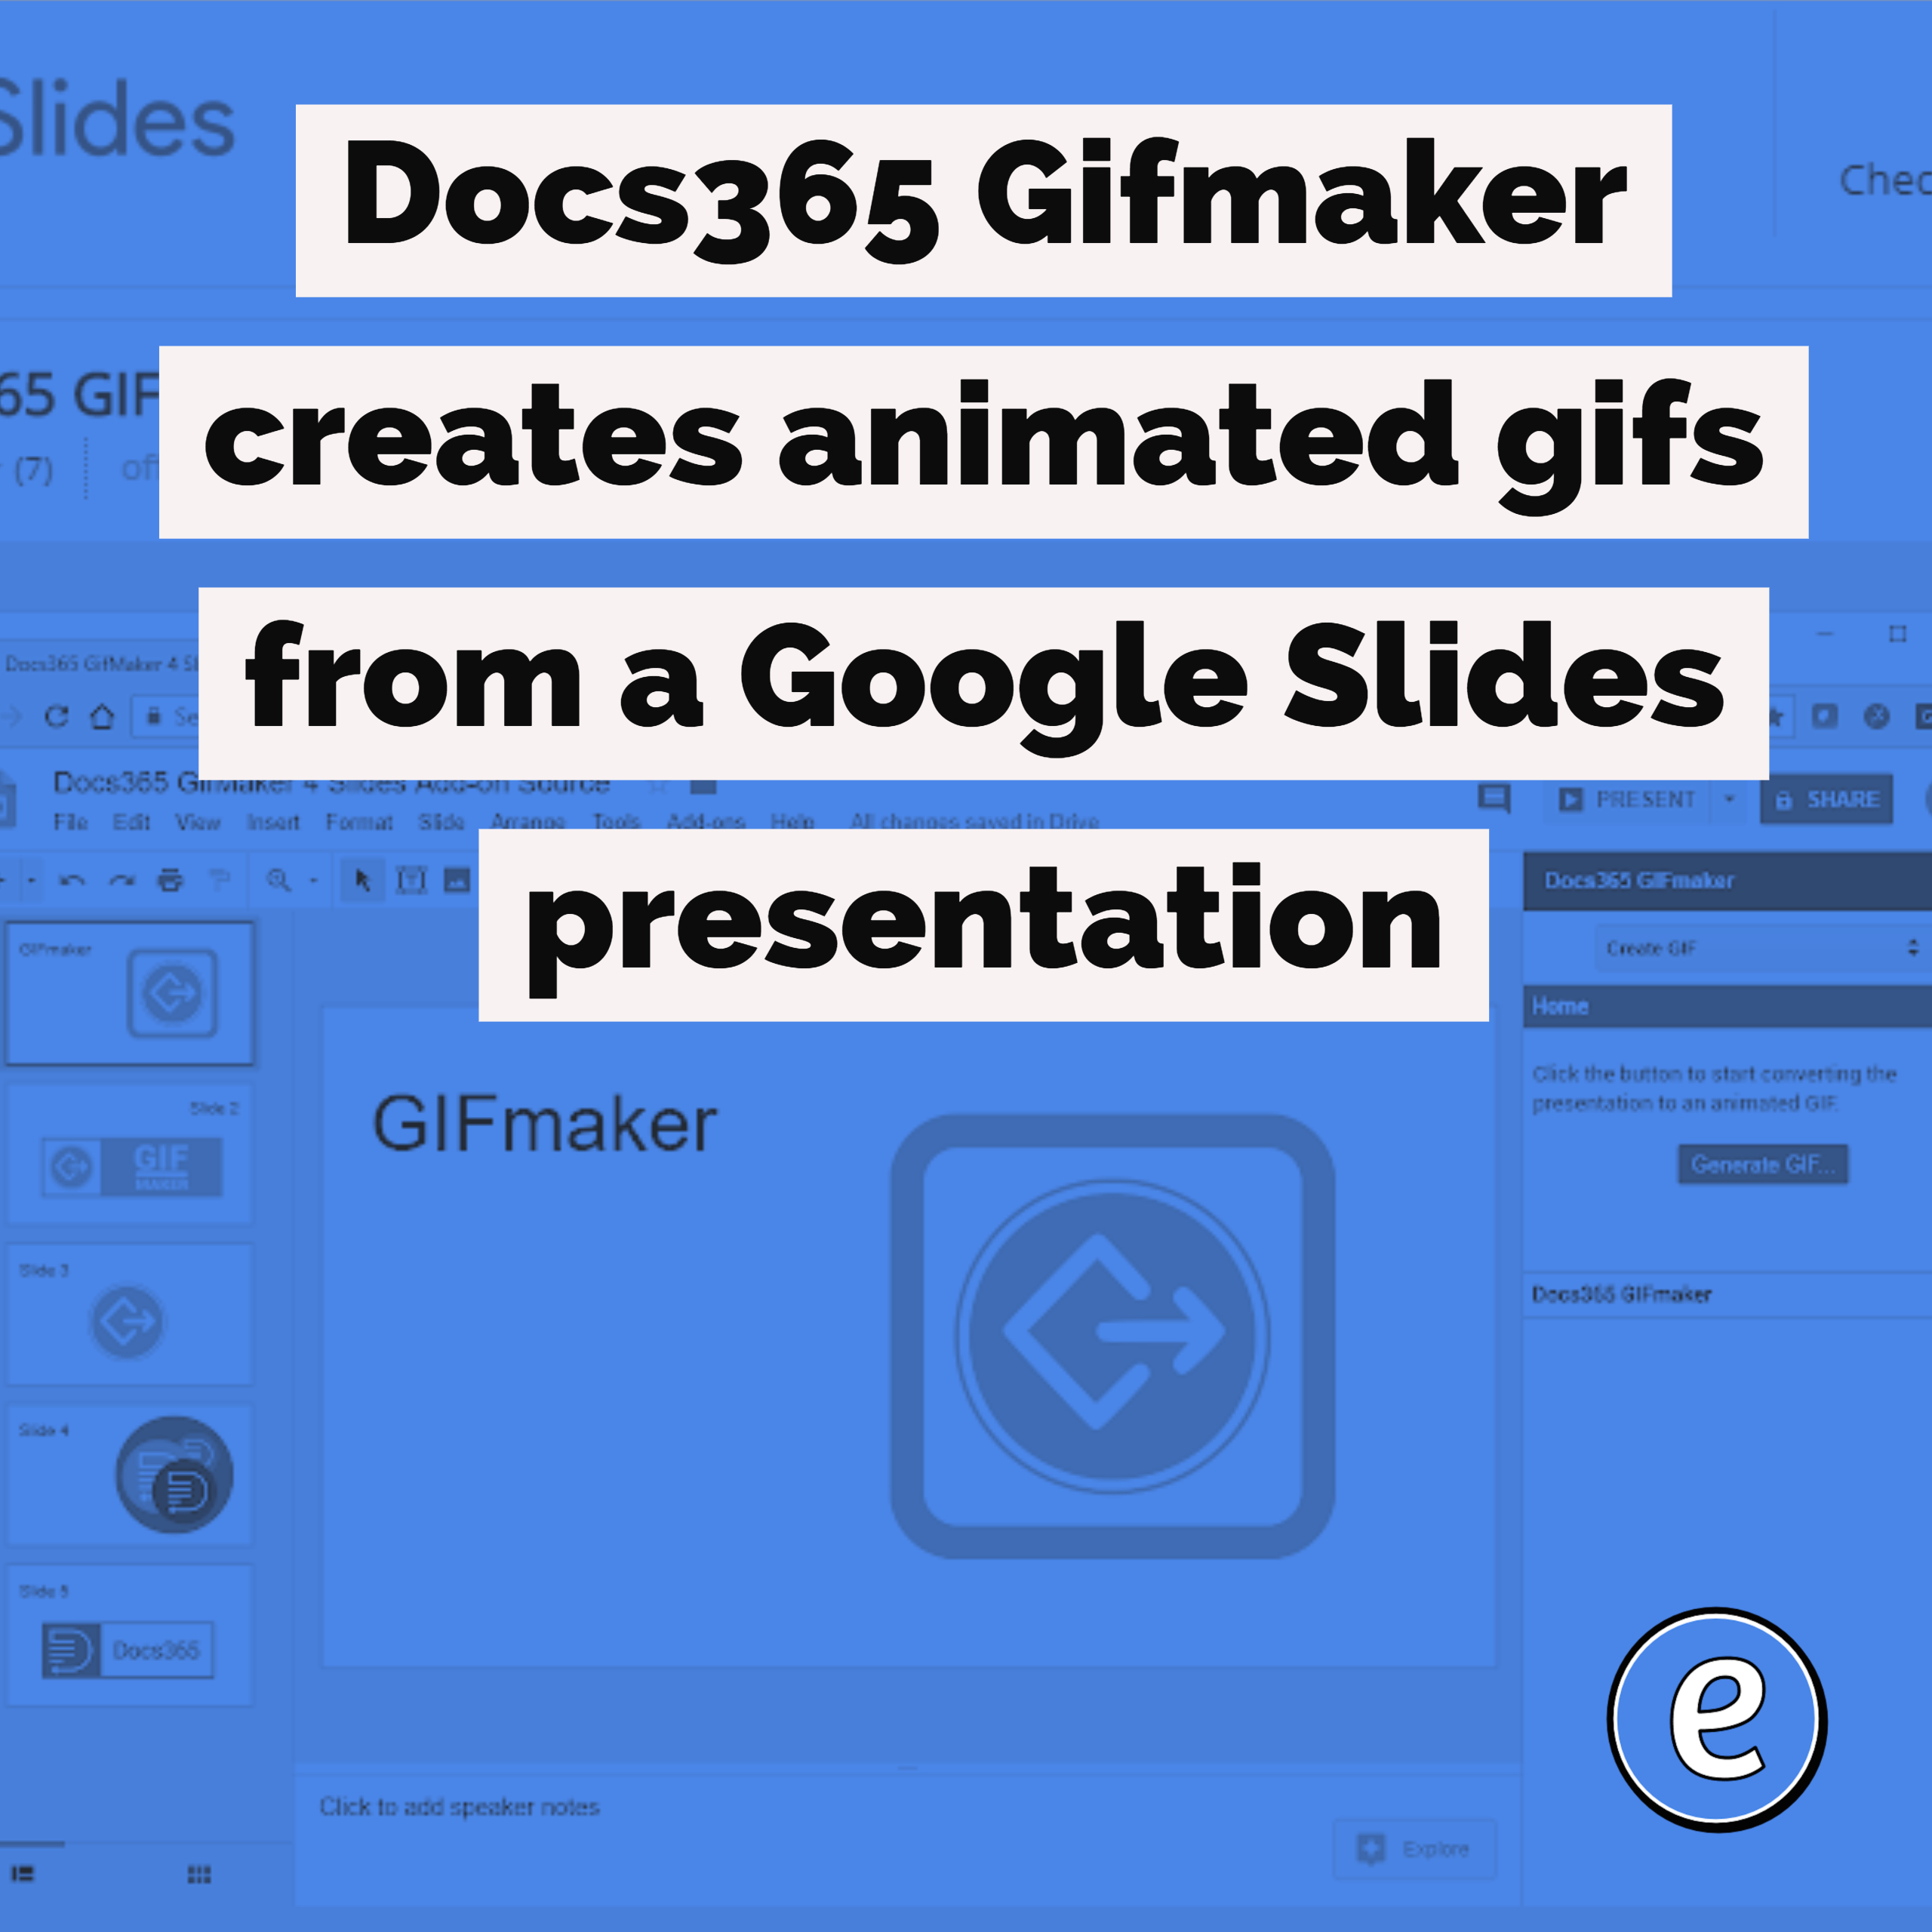 Docs365 Gifmaker creates animated gifs from a Google Slides presentation